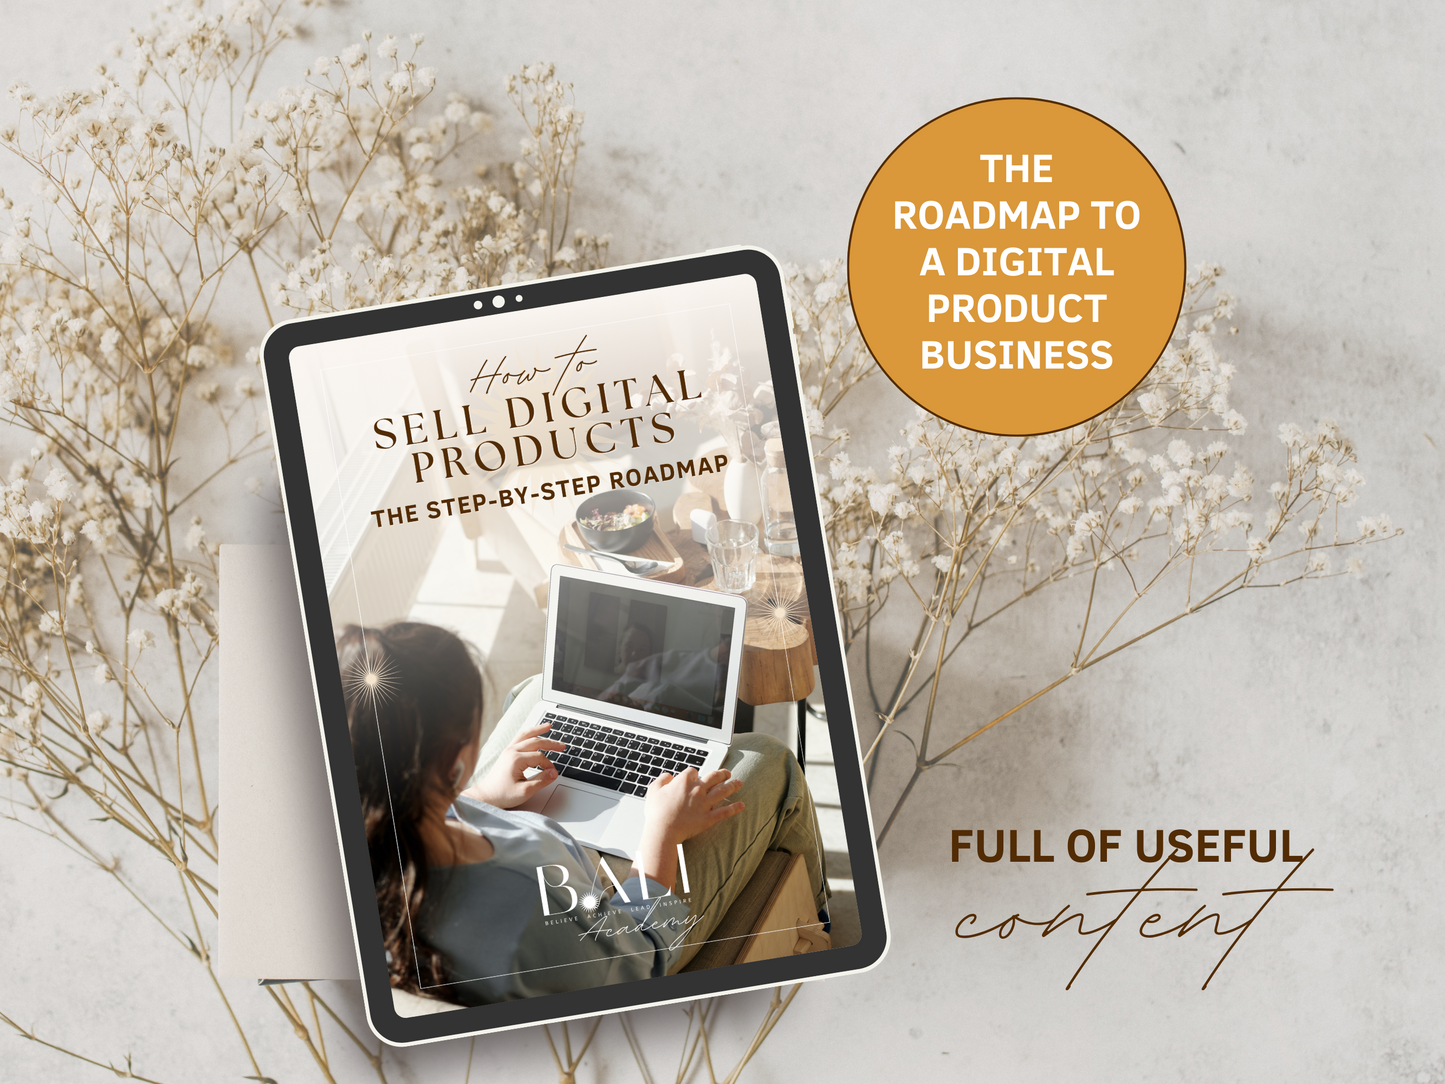 How To Sell Digital Products - The step-by-step PLR roadmap to a digital product business. It's full of useful content and editable in Canva. You can see a tablet mockup with a photo of a female entrepreneur working on her online business.